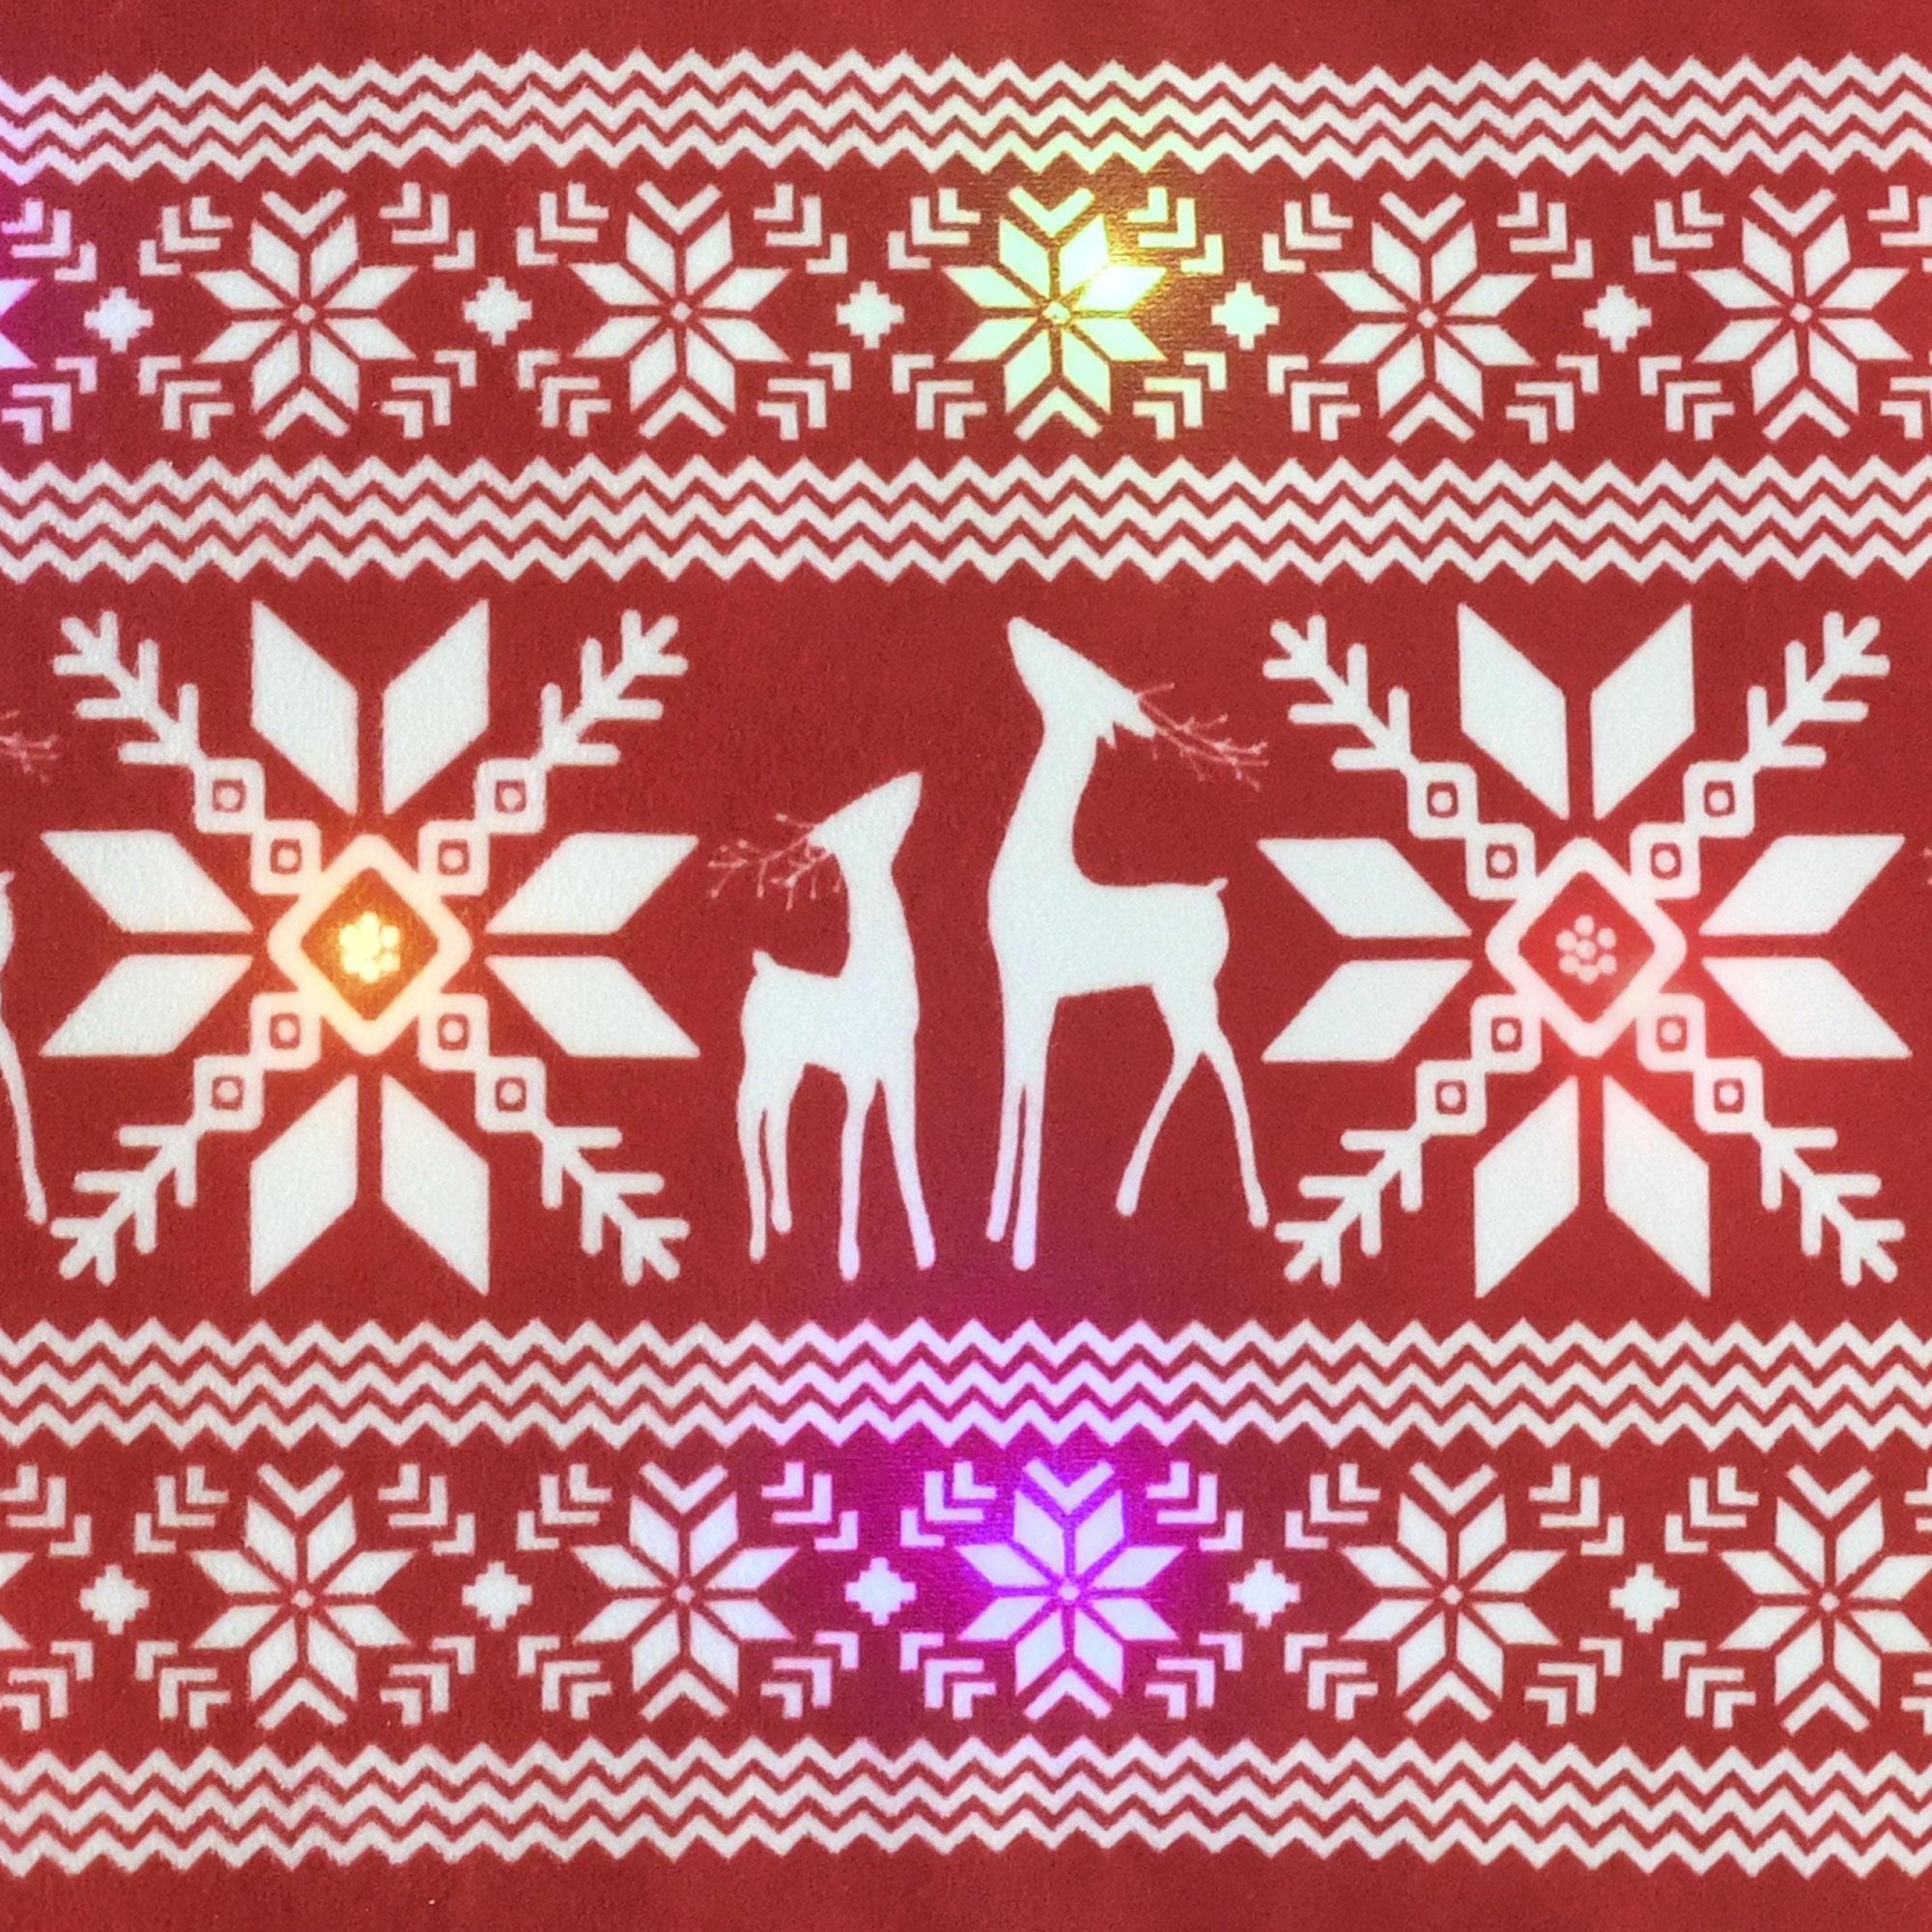 Snowflake and Reindeer LED Light Decorative Pillow